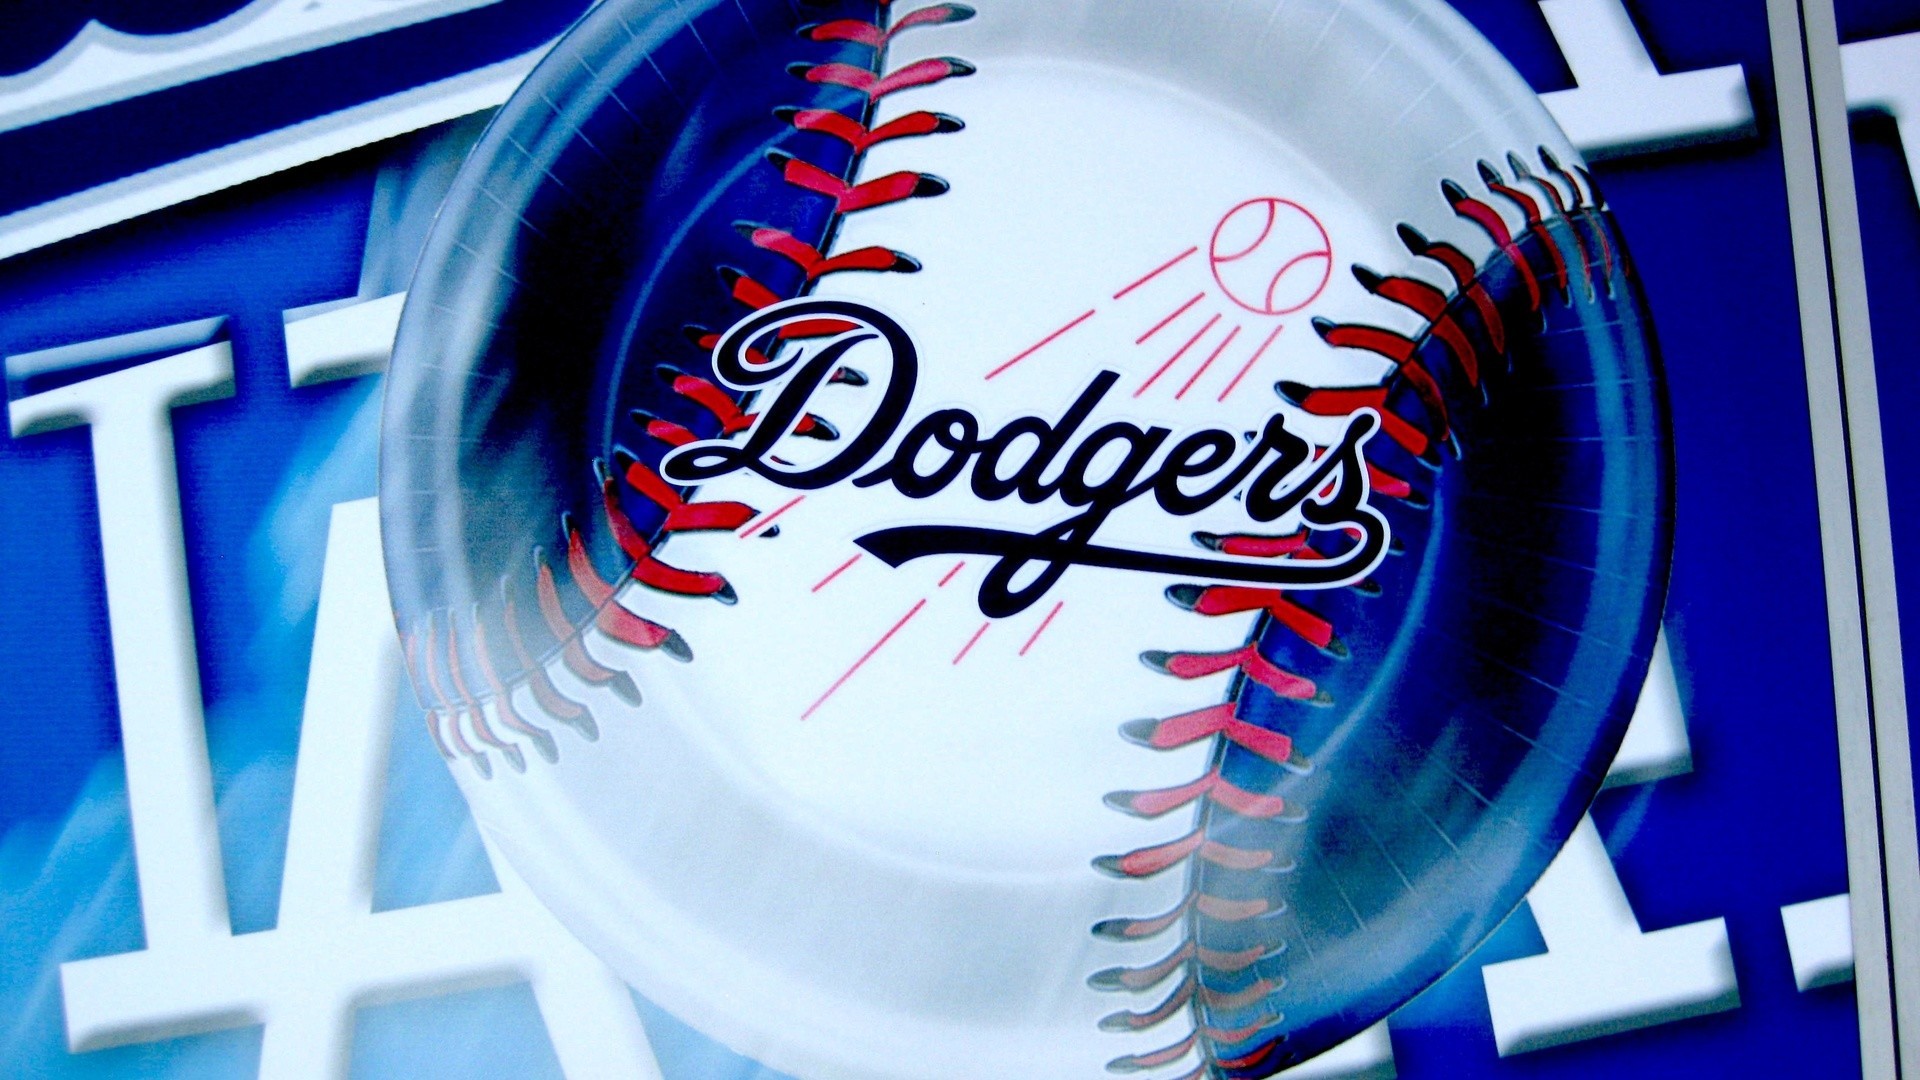 1920x1080 1920x1200 1920x1200 Dodgers Wallpapers - Wallpaper Cave magnificent los  angeles dodgers wallpapers hd background .